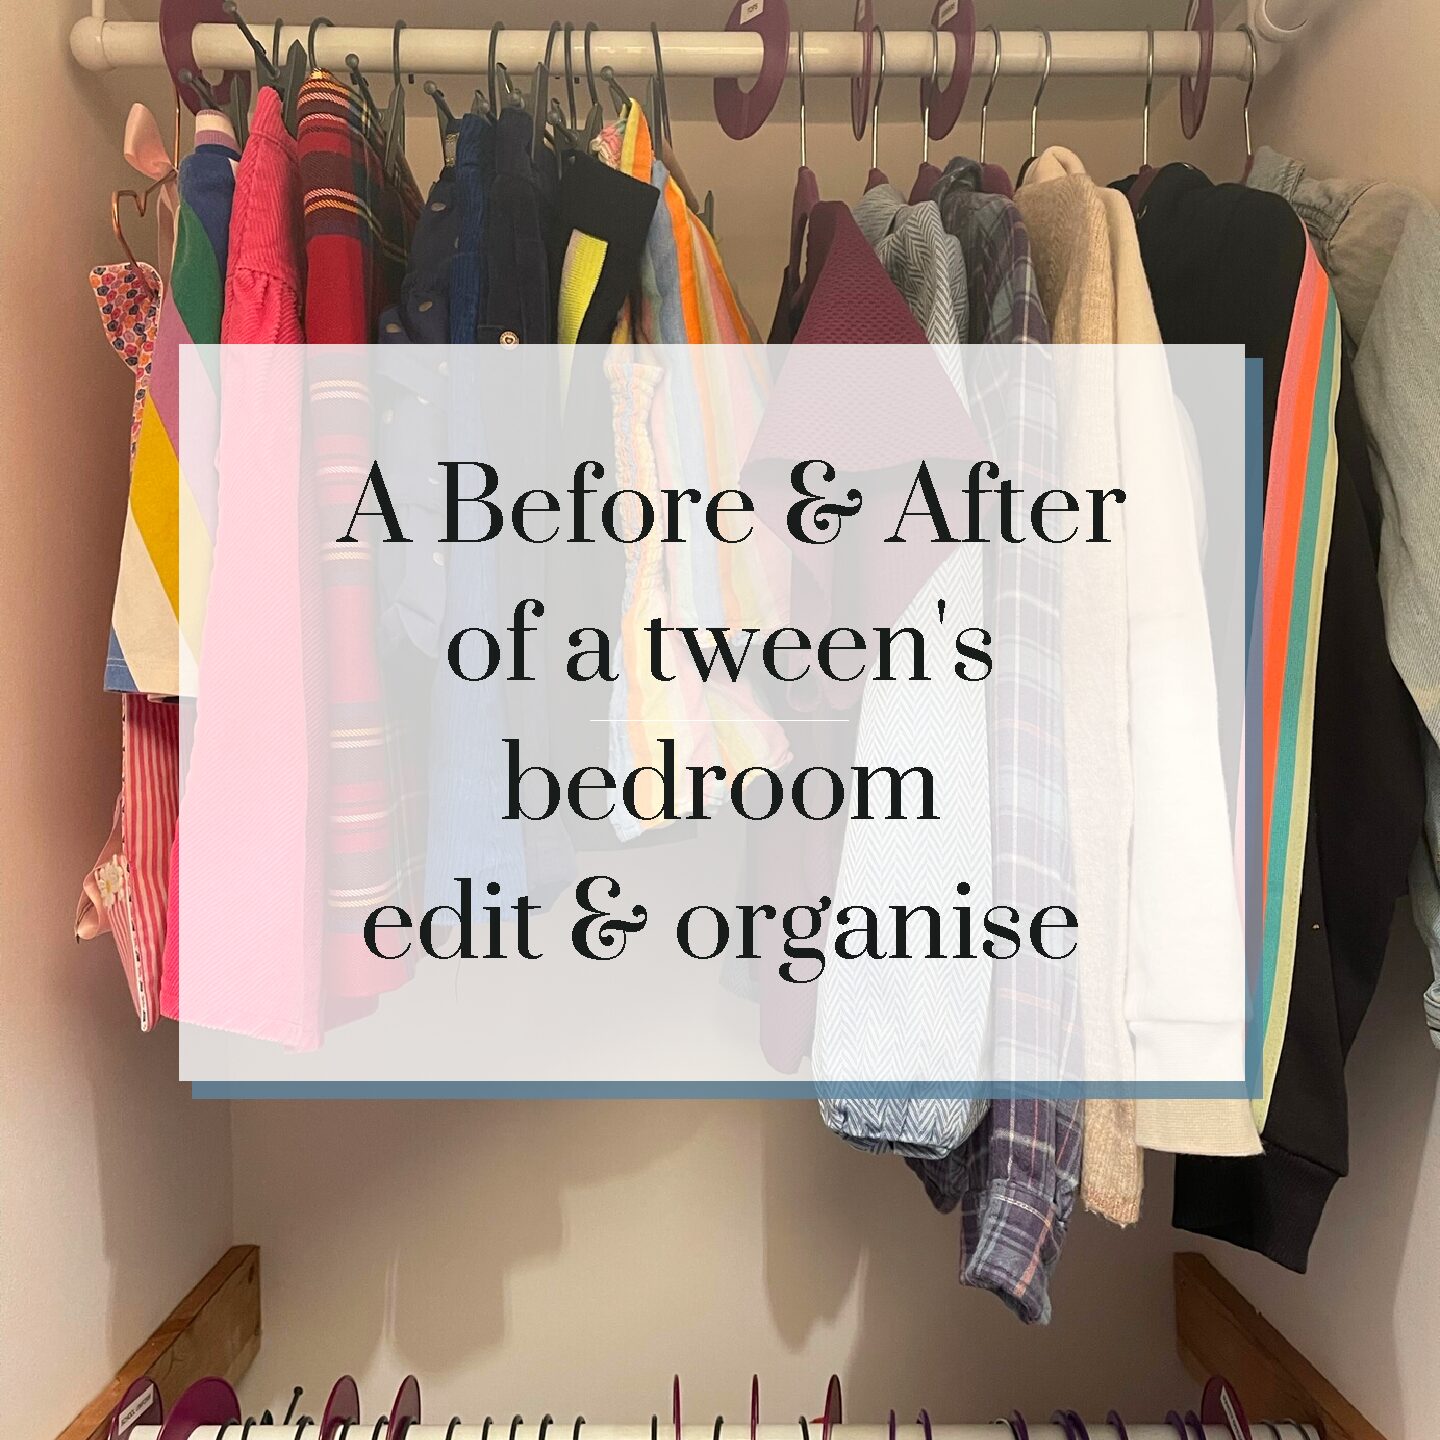 A Before & After of a tween’s bedroom edit & organise